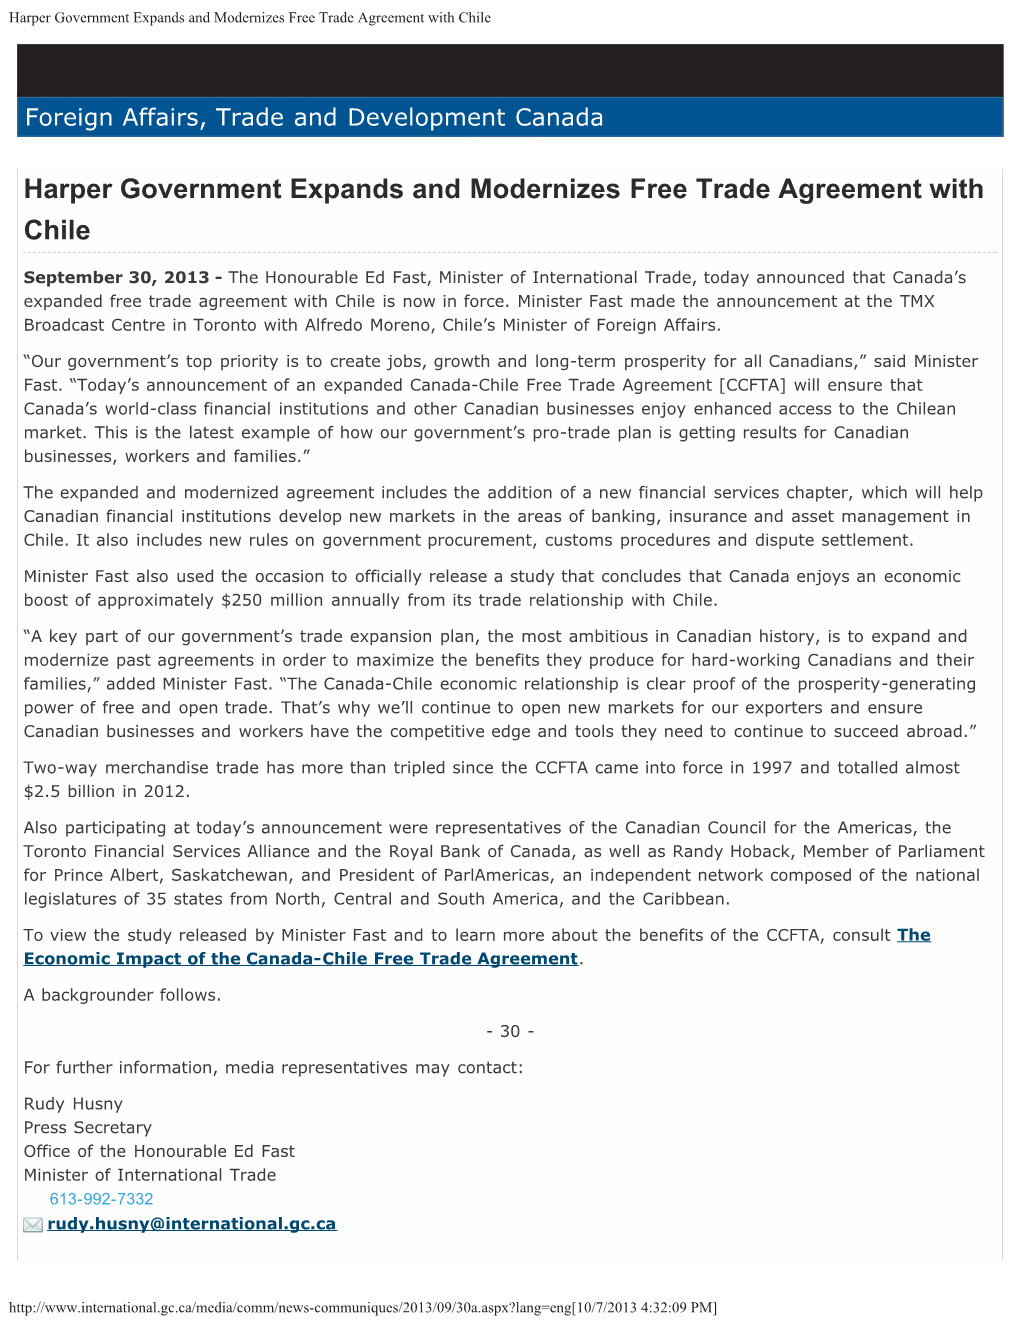 Harper Government Expands and Modernizes Free Trade Agreement with Chile